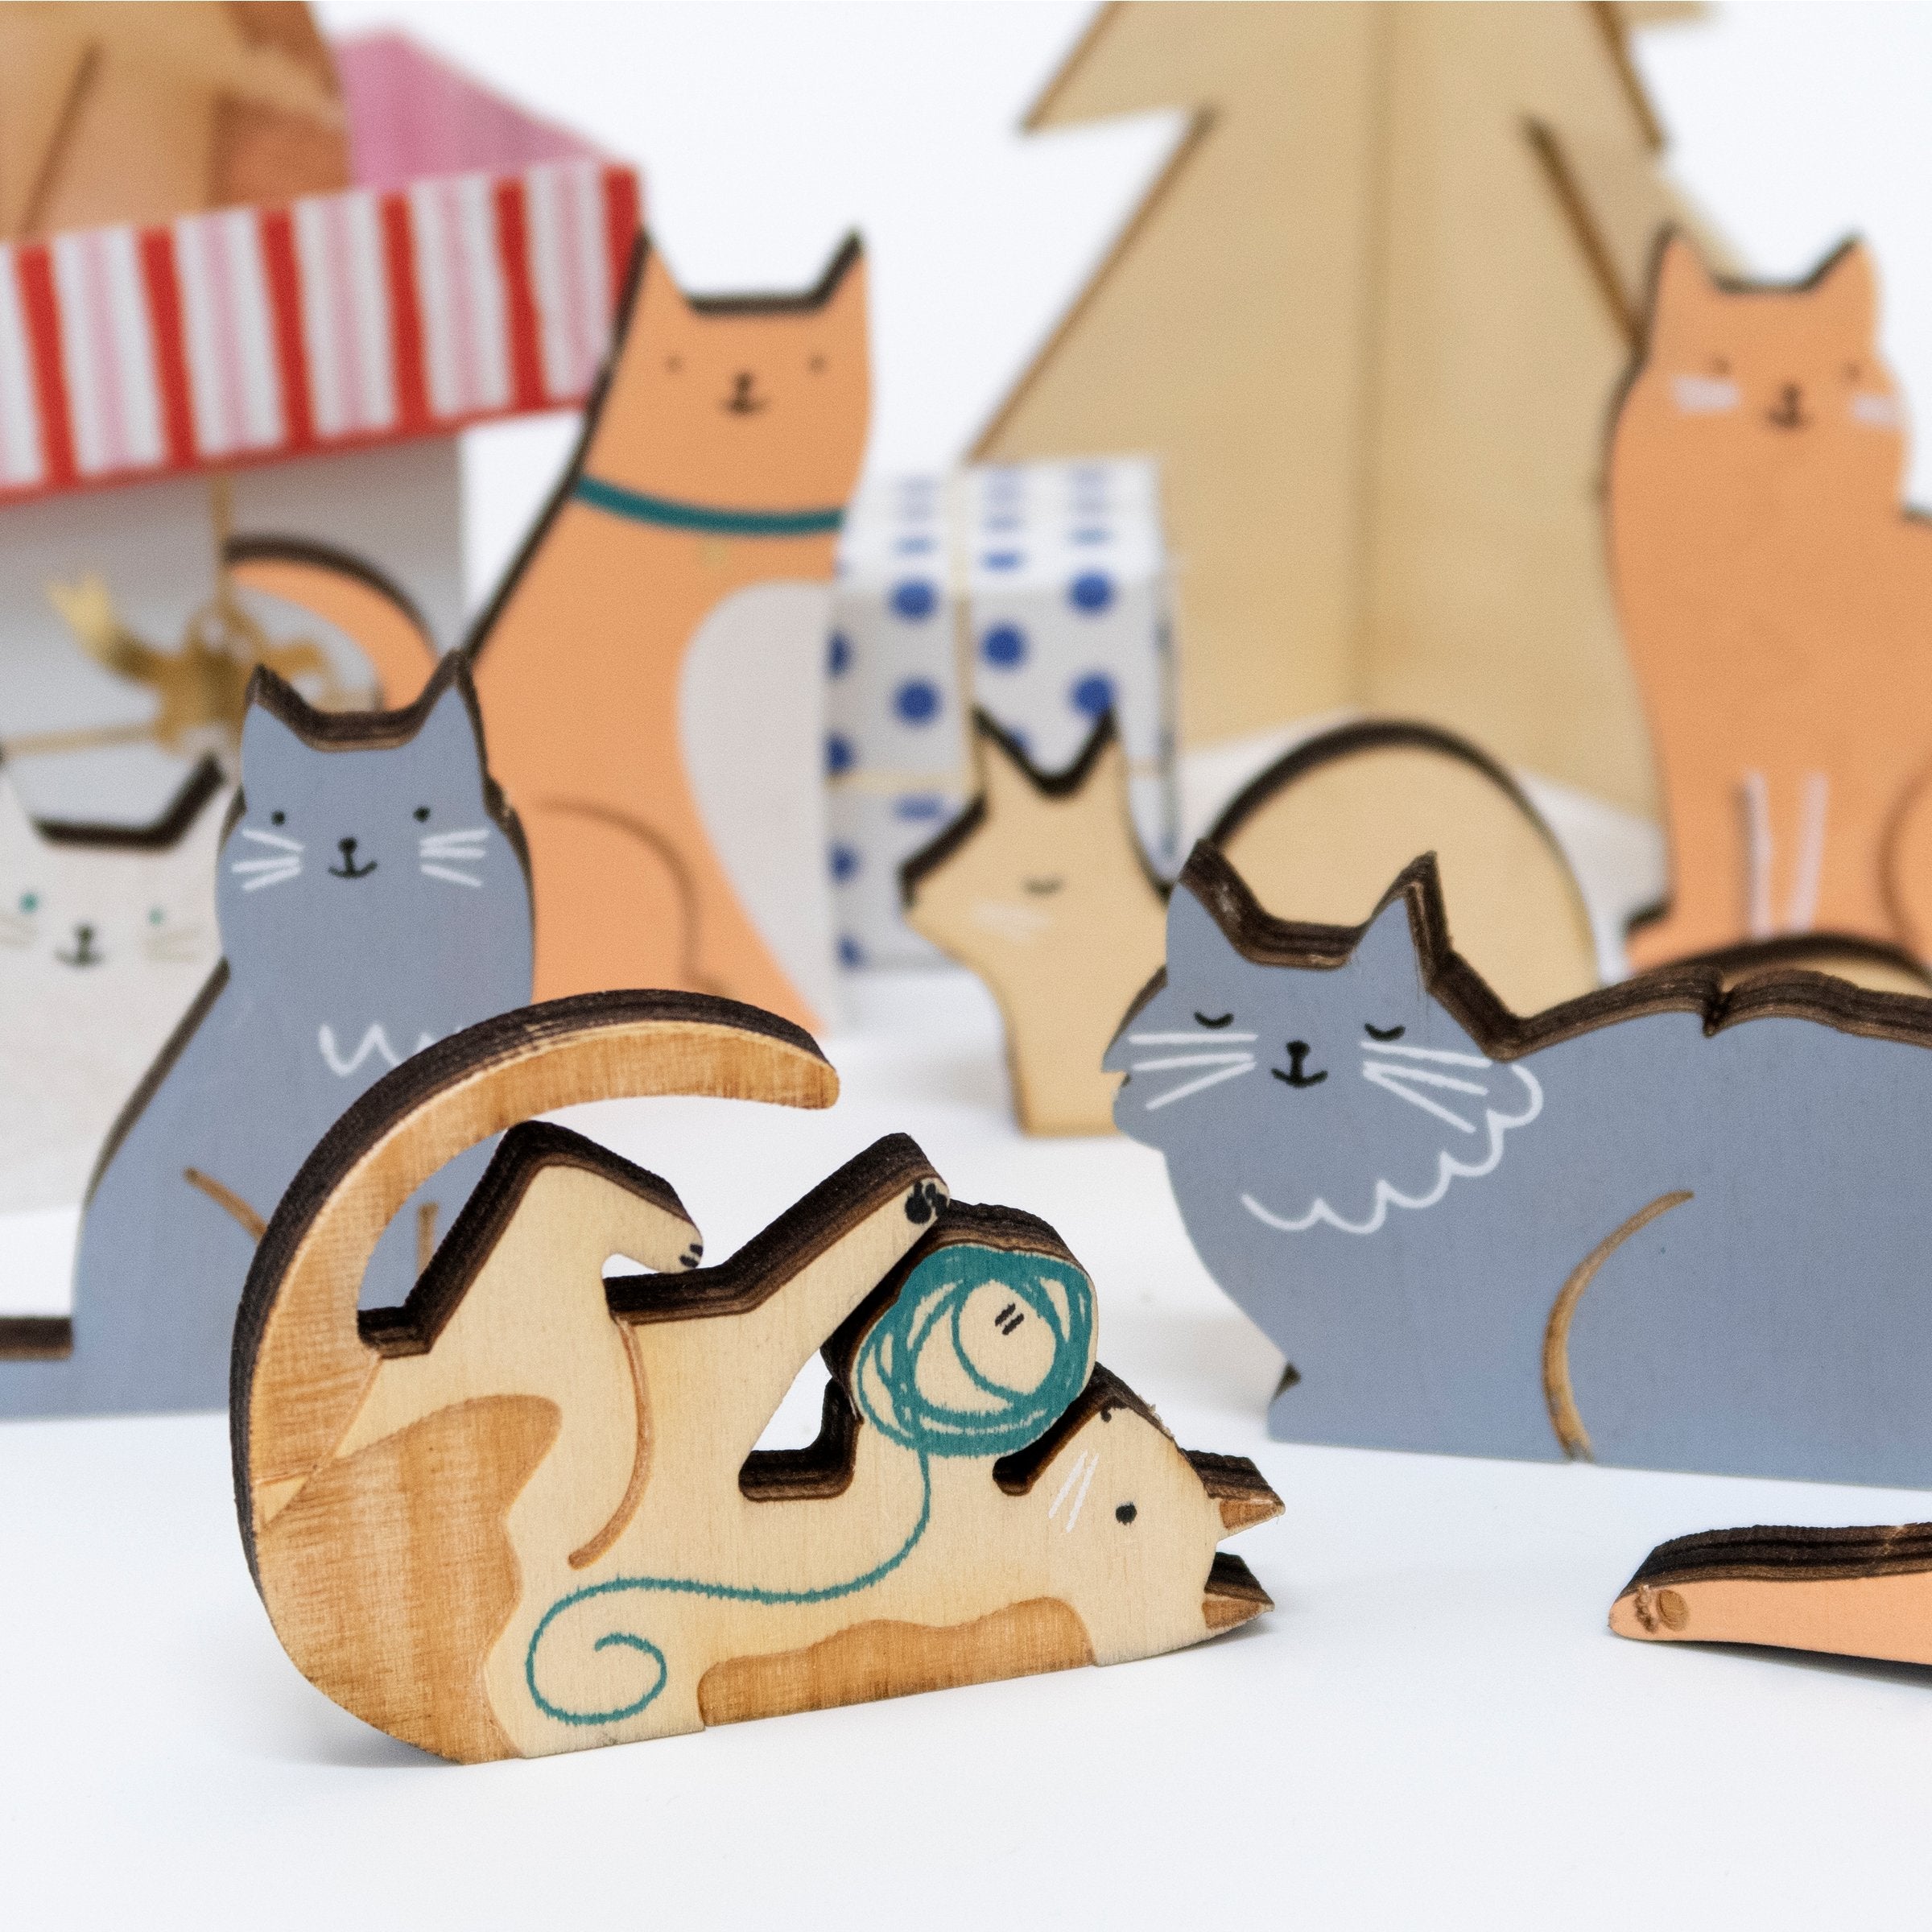 This wonderful kids advent calendar is full of kids cat toys, crafted from wood.